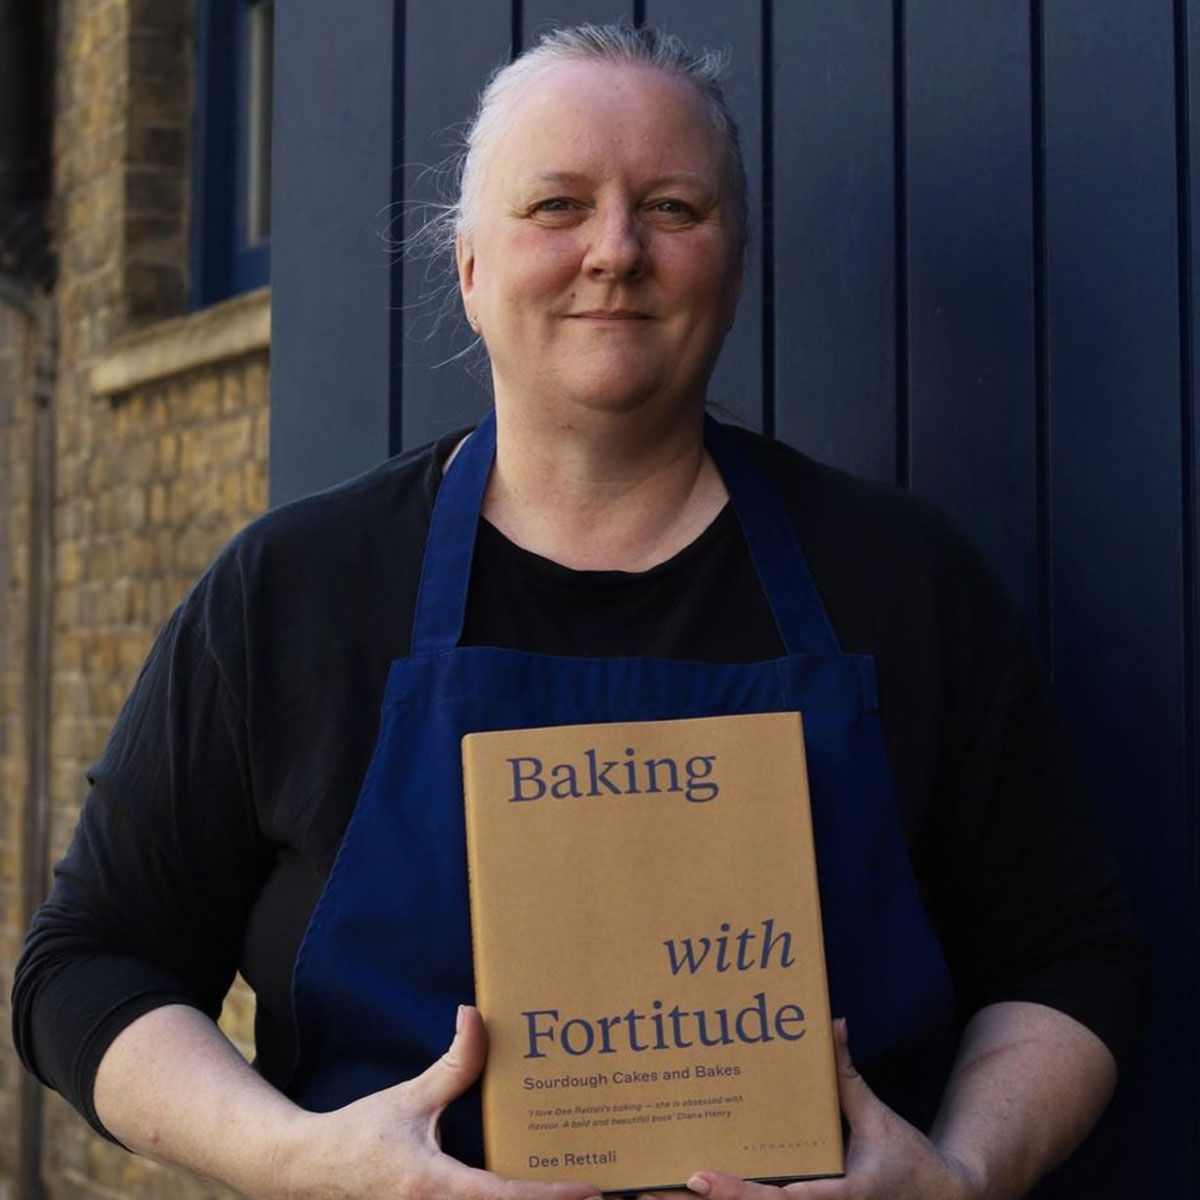 Dee Rettali with her book ‘Baking with Fortitude’